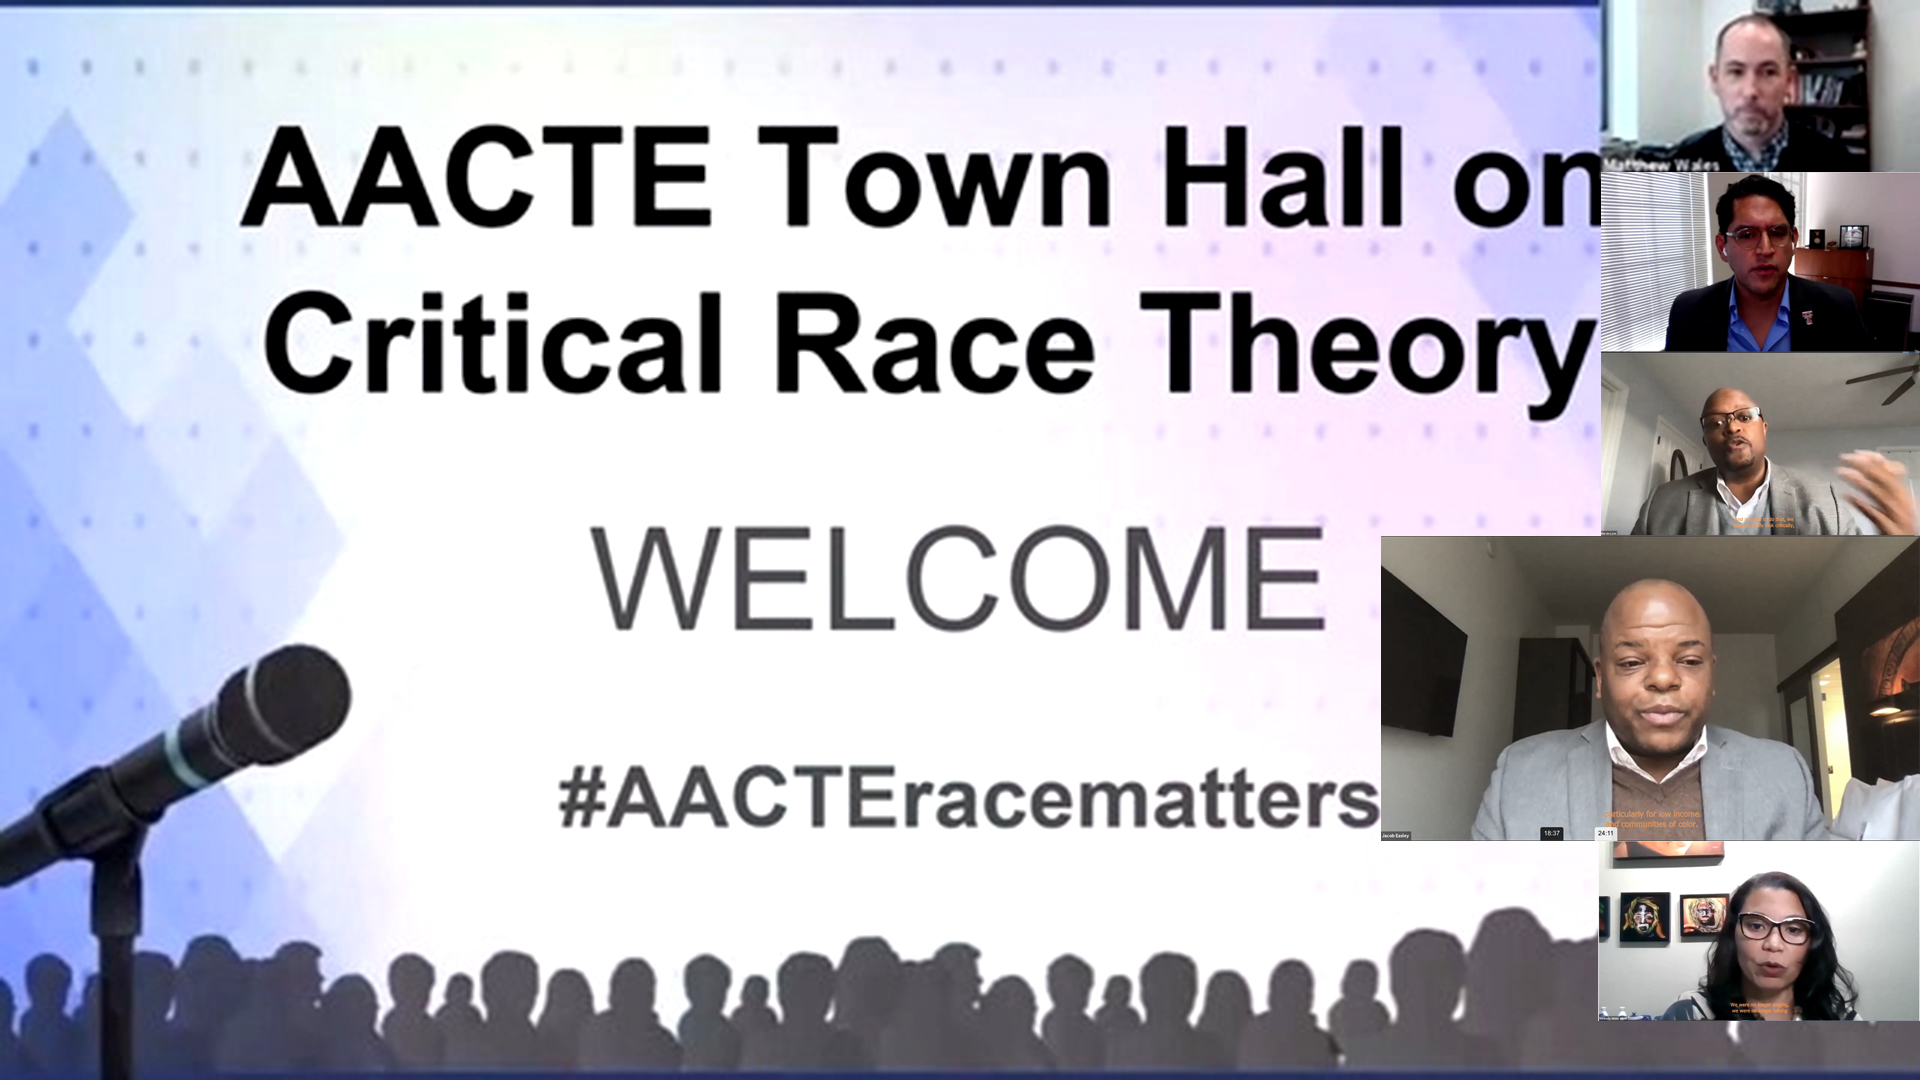 Image of screenshot of title page of virtual town hall with title: AACTE Town Hall on Critical Race Theory #AACTEracematters with gallery of speakers on right side, including Dean Jacob Easley. 